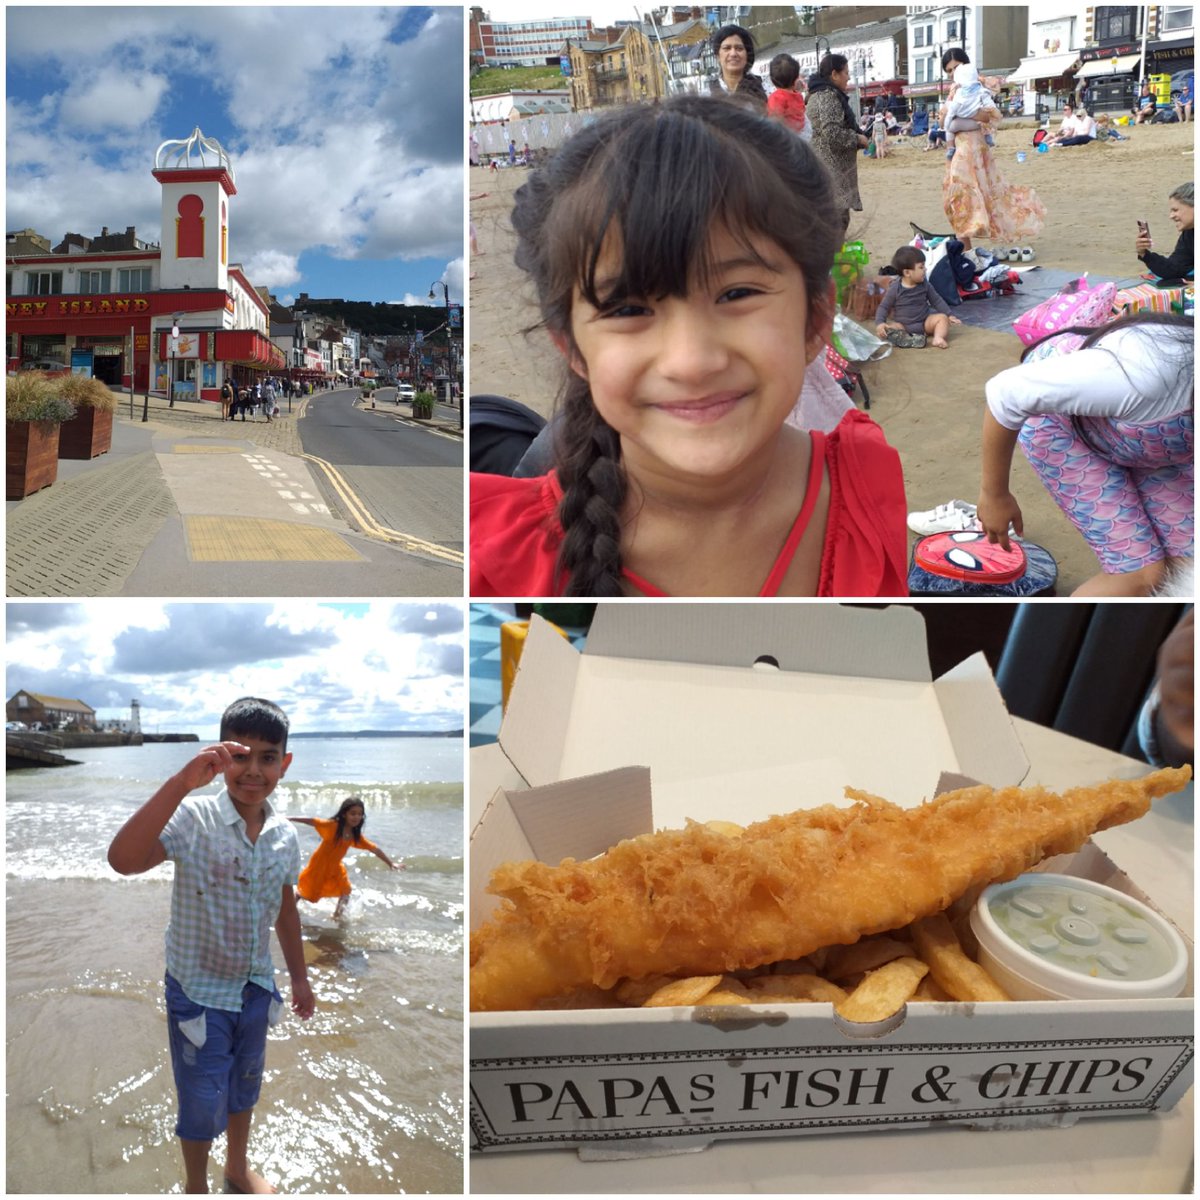 Our pupils and their families have enjoyed a fantastic day trip to Scarborough thanks to funding from The Henry Smith Charity #enjoyment #coachtrip